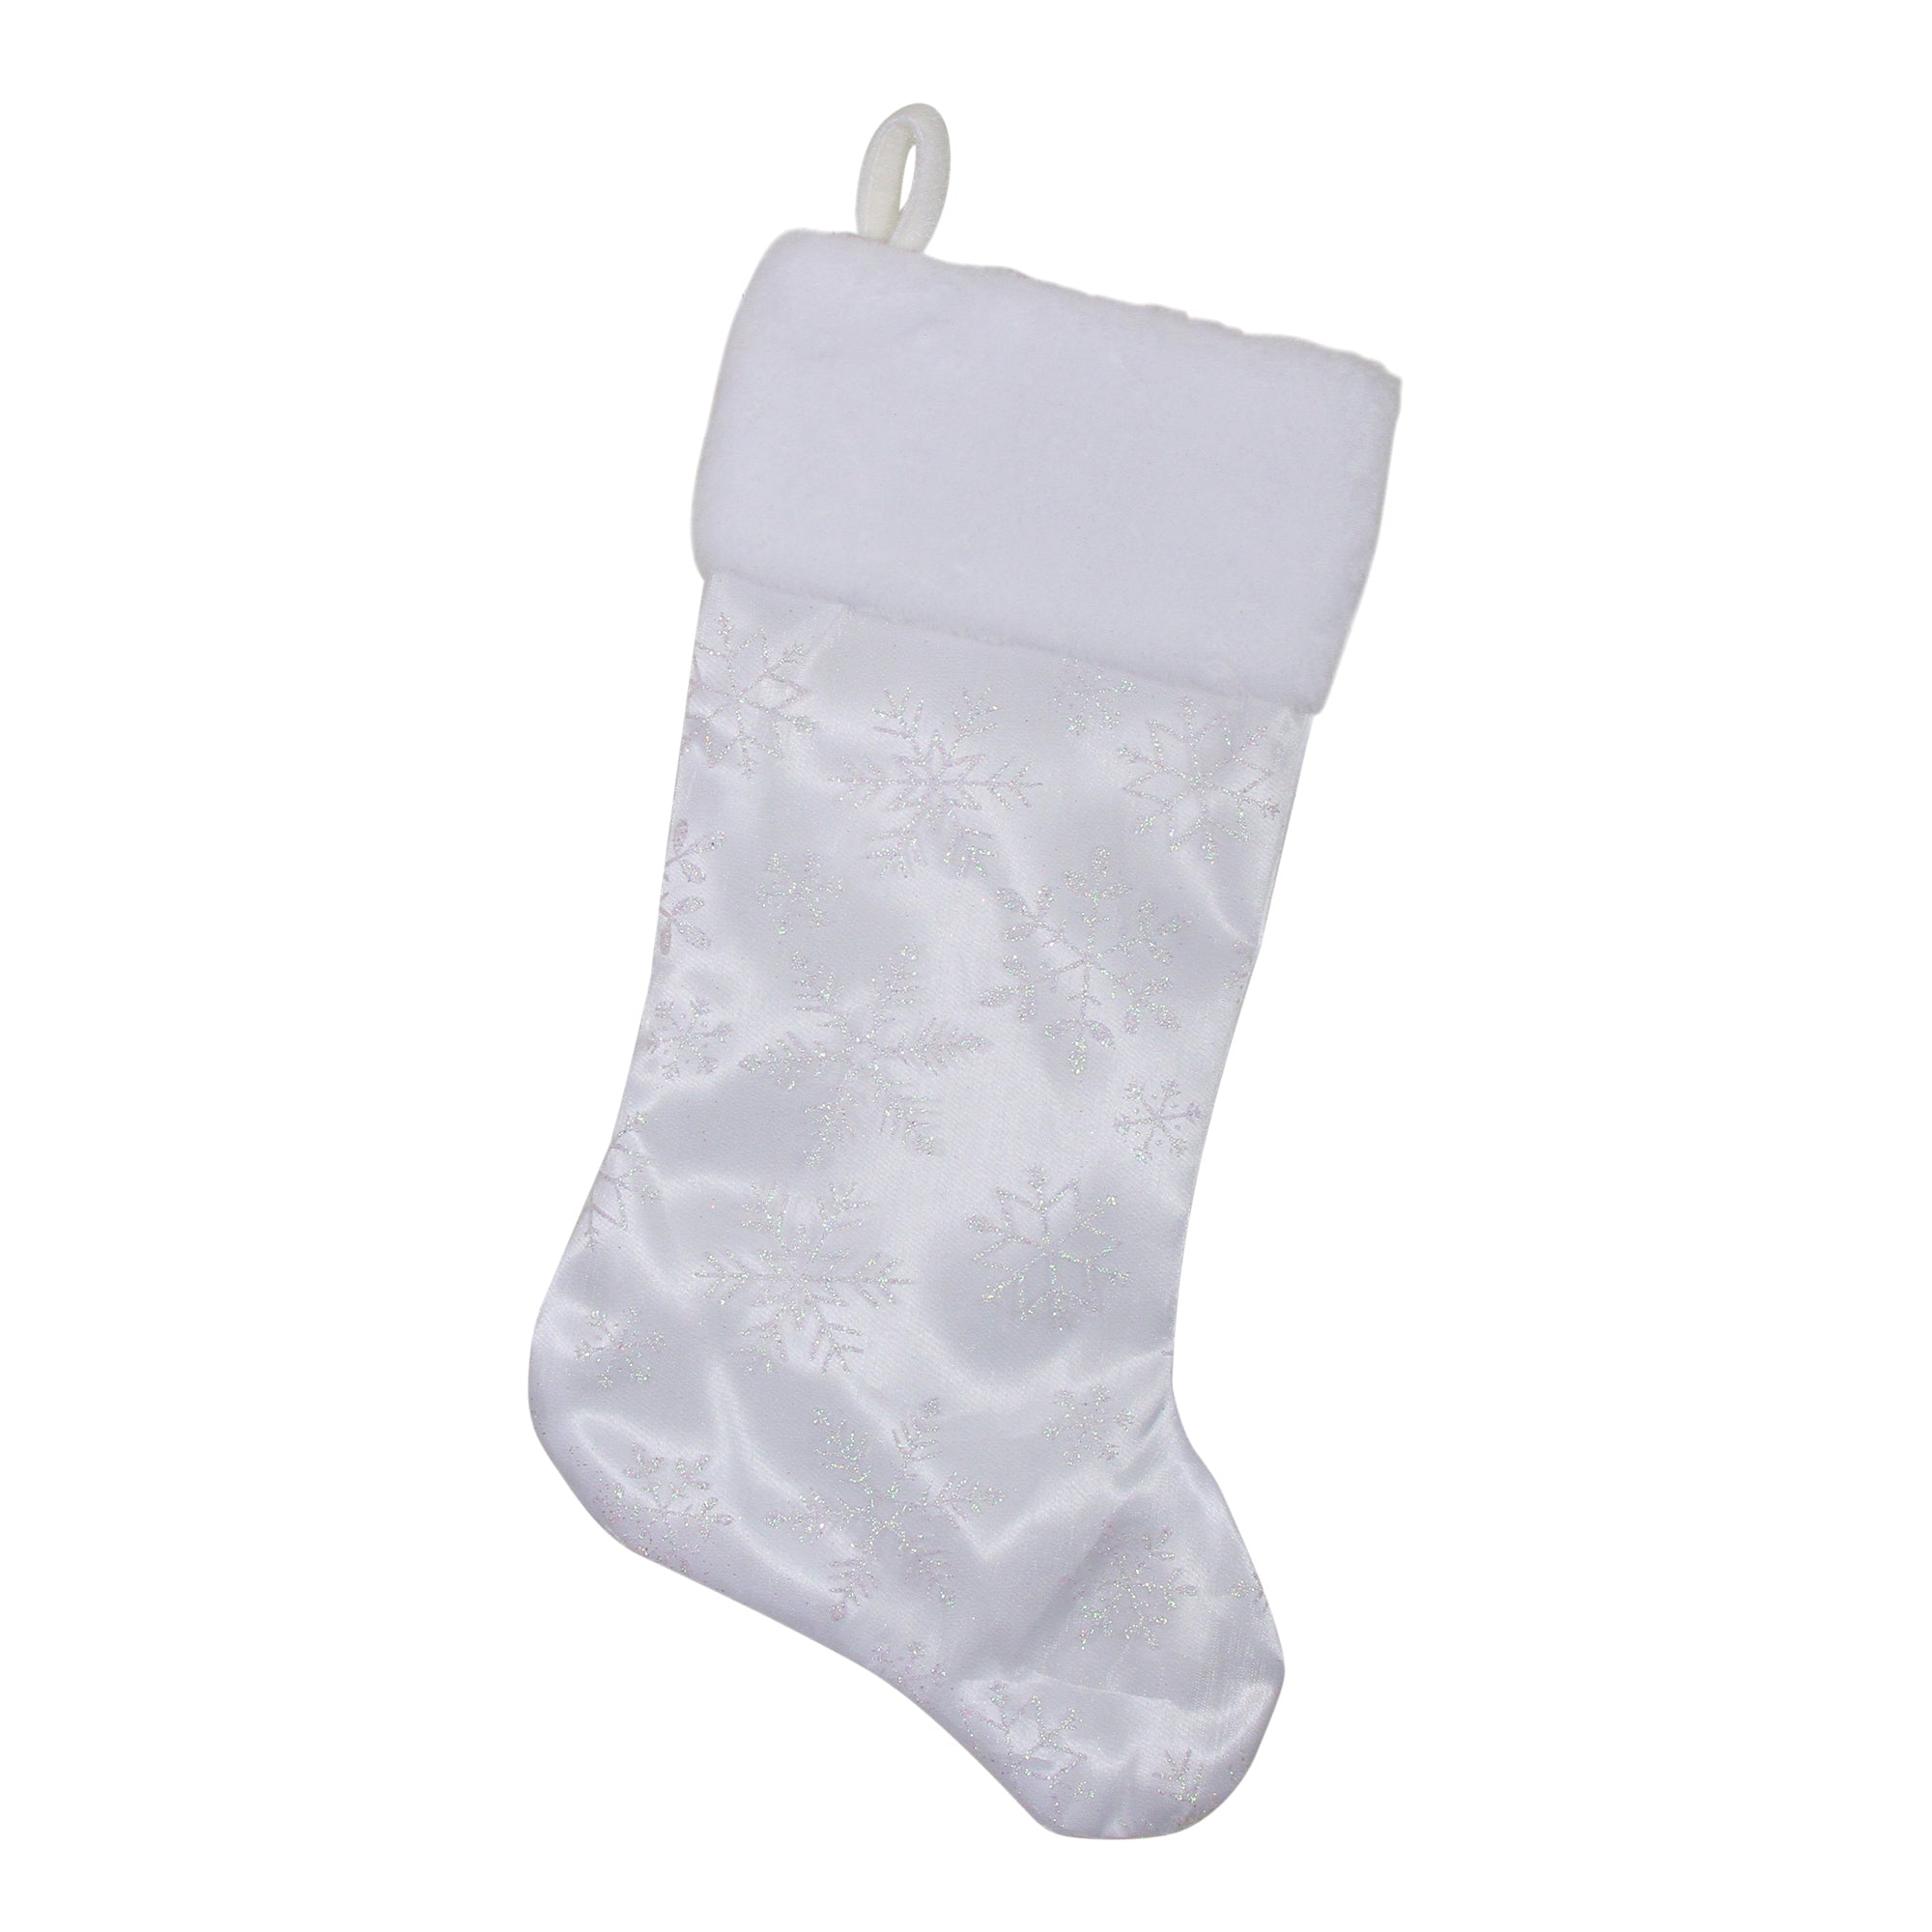 20.5" White Iridescent Glittered Snowflake Christmas Stocking with White Faux Fur Cuff